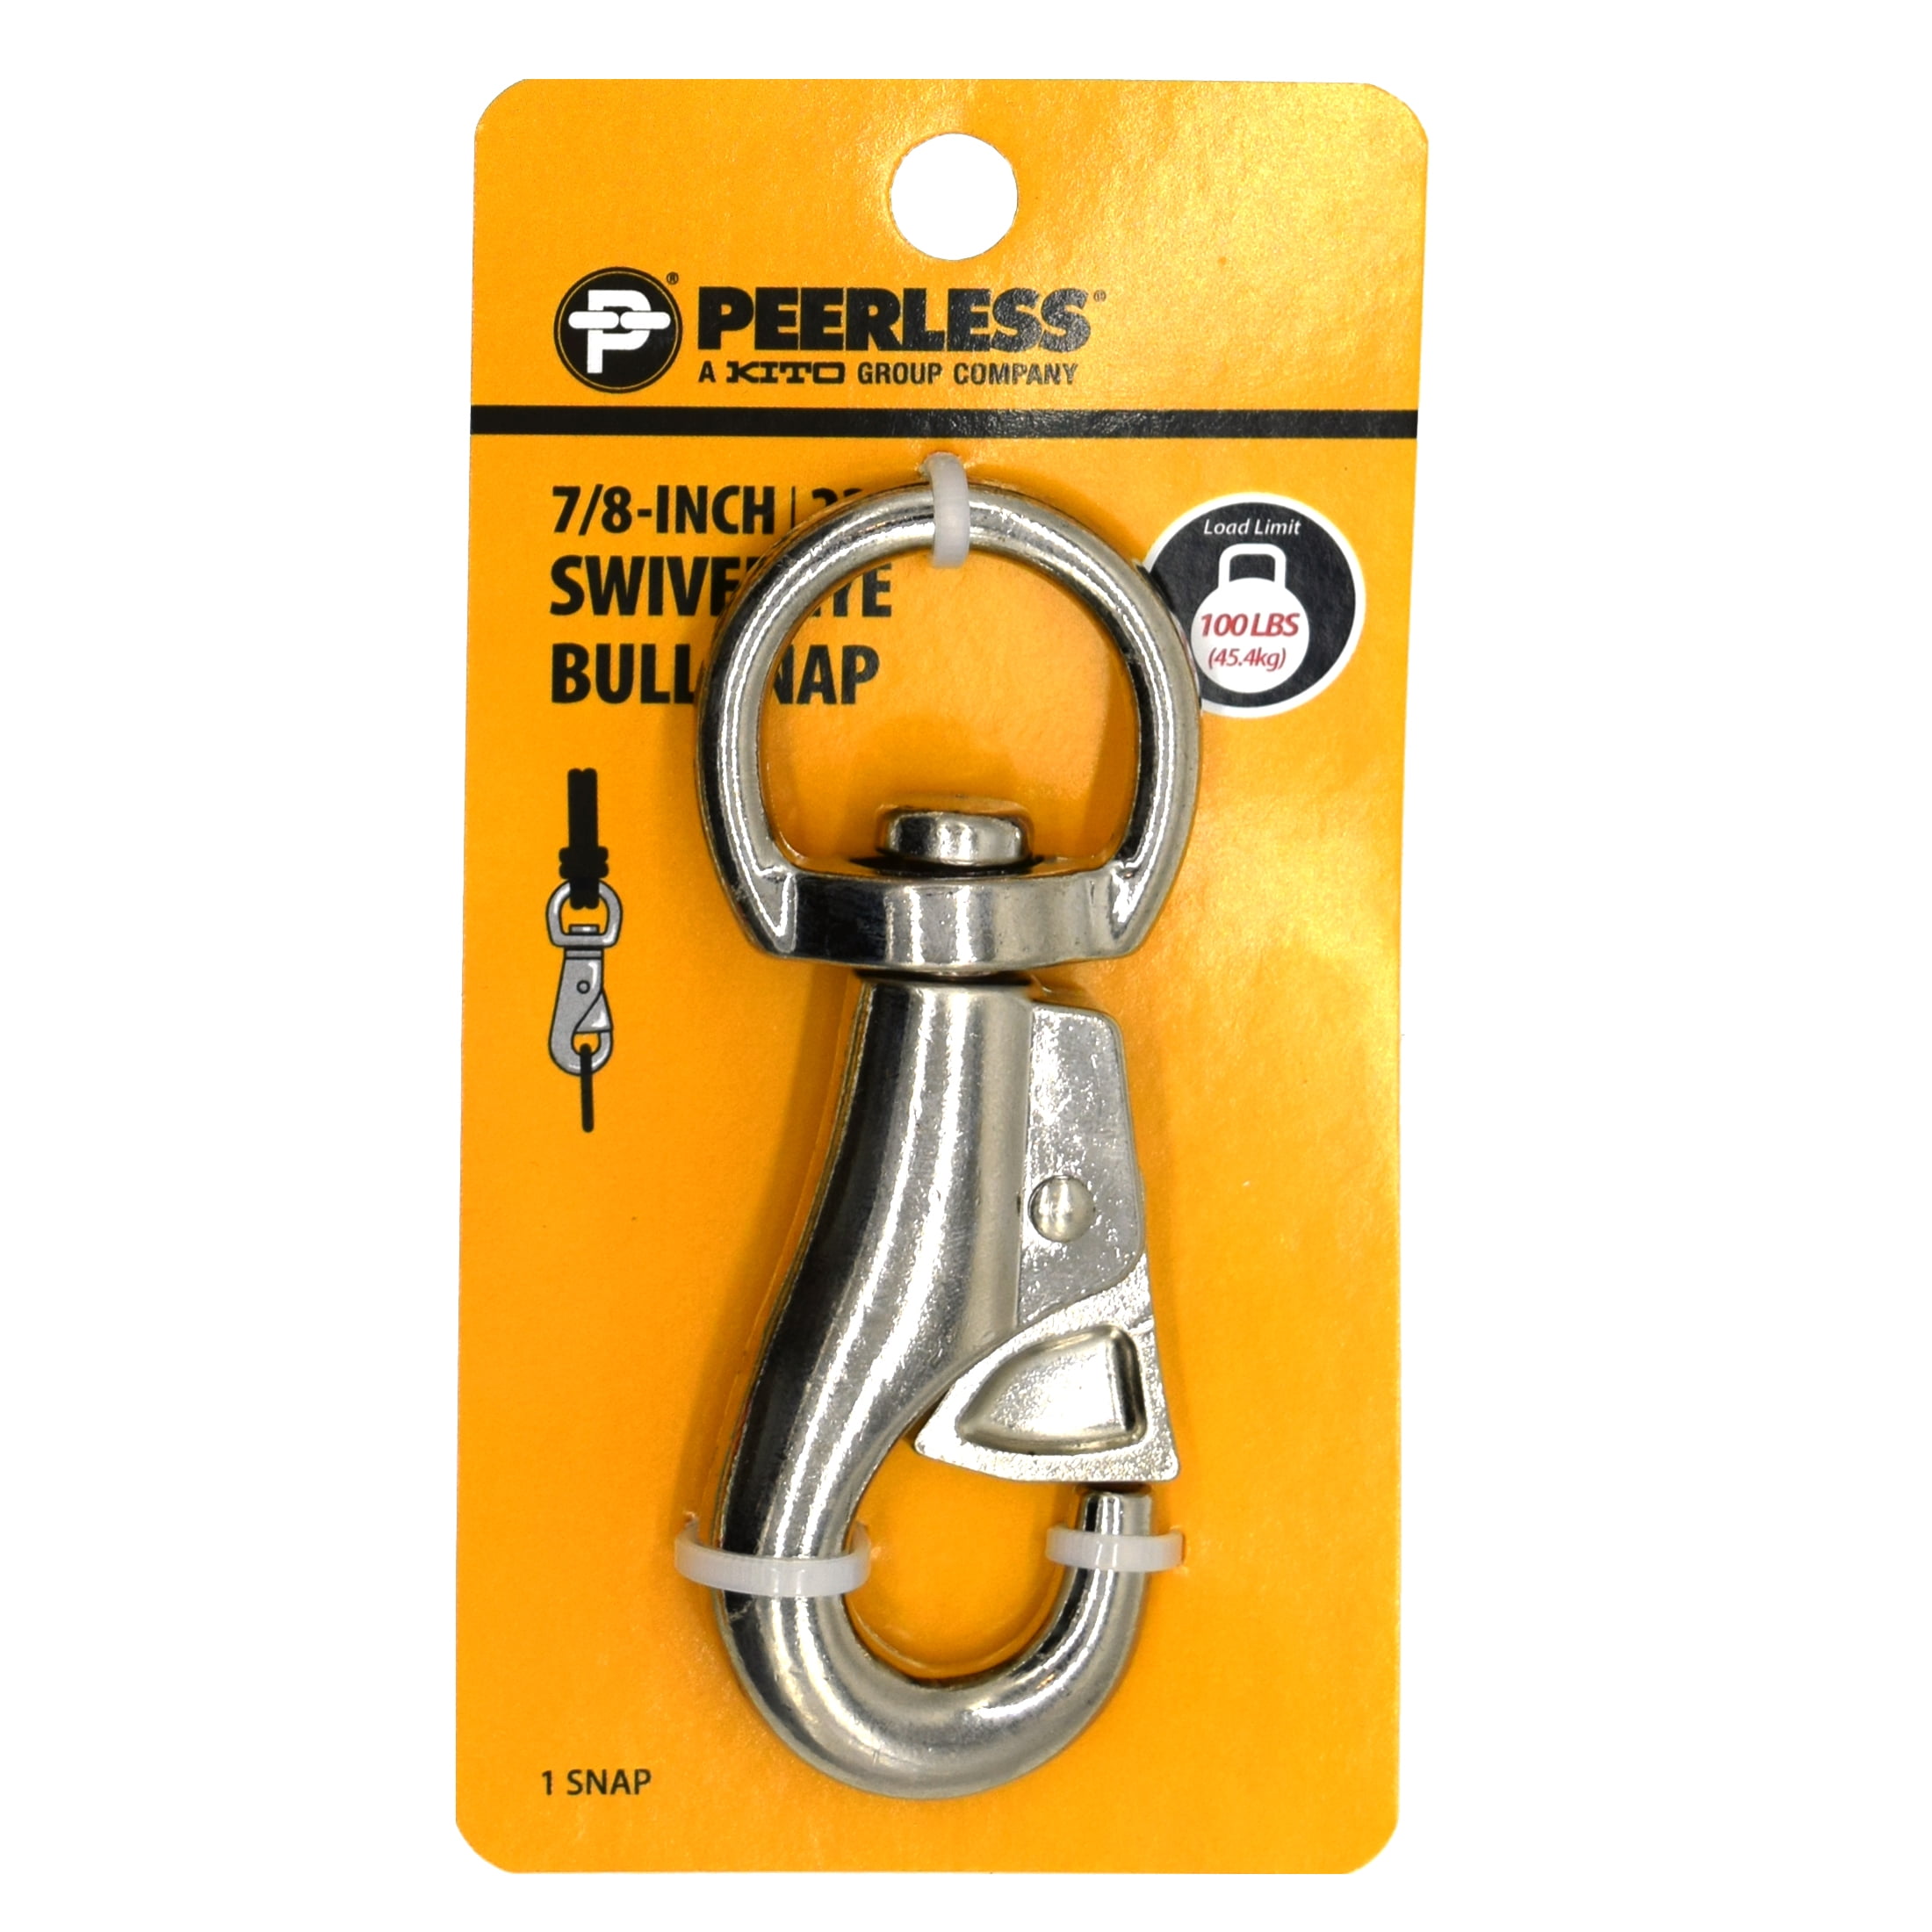 Detachable Snap Hook Swivel Clasp with Screw Bar